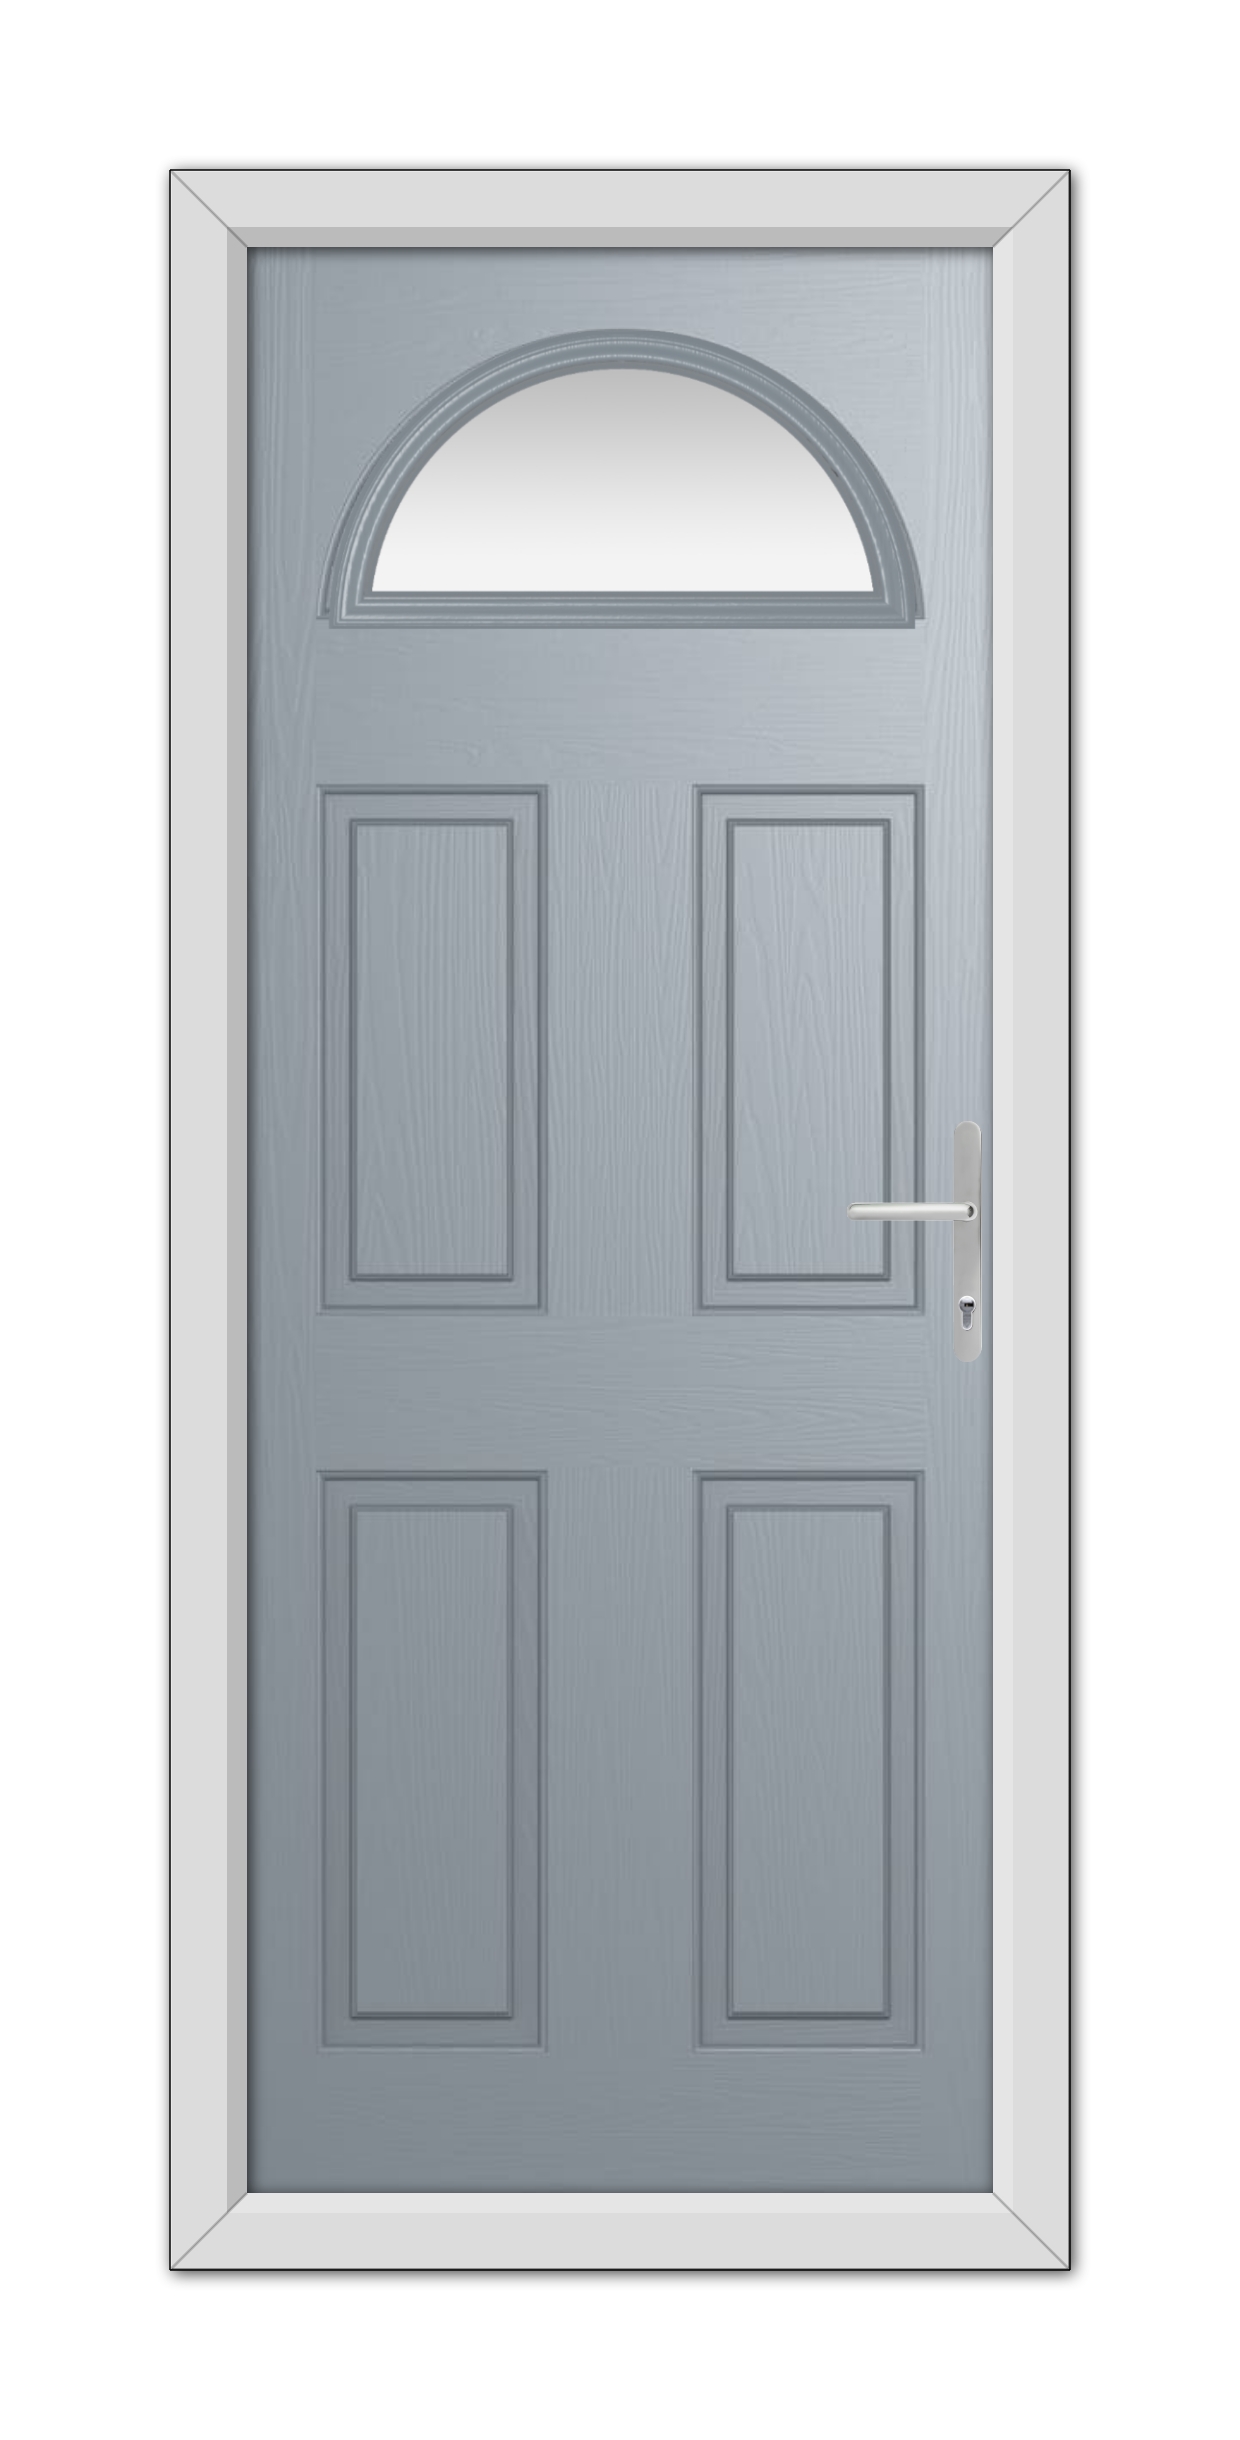 A modern French Grey Winslow 1 Composite Door 48mm Timber Core with six panels and a silver handle, framed by a white door frame with an arched window at the top.